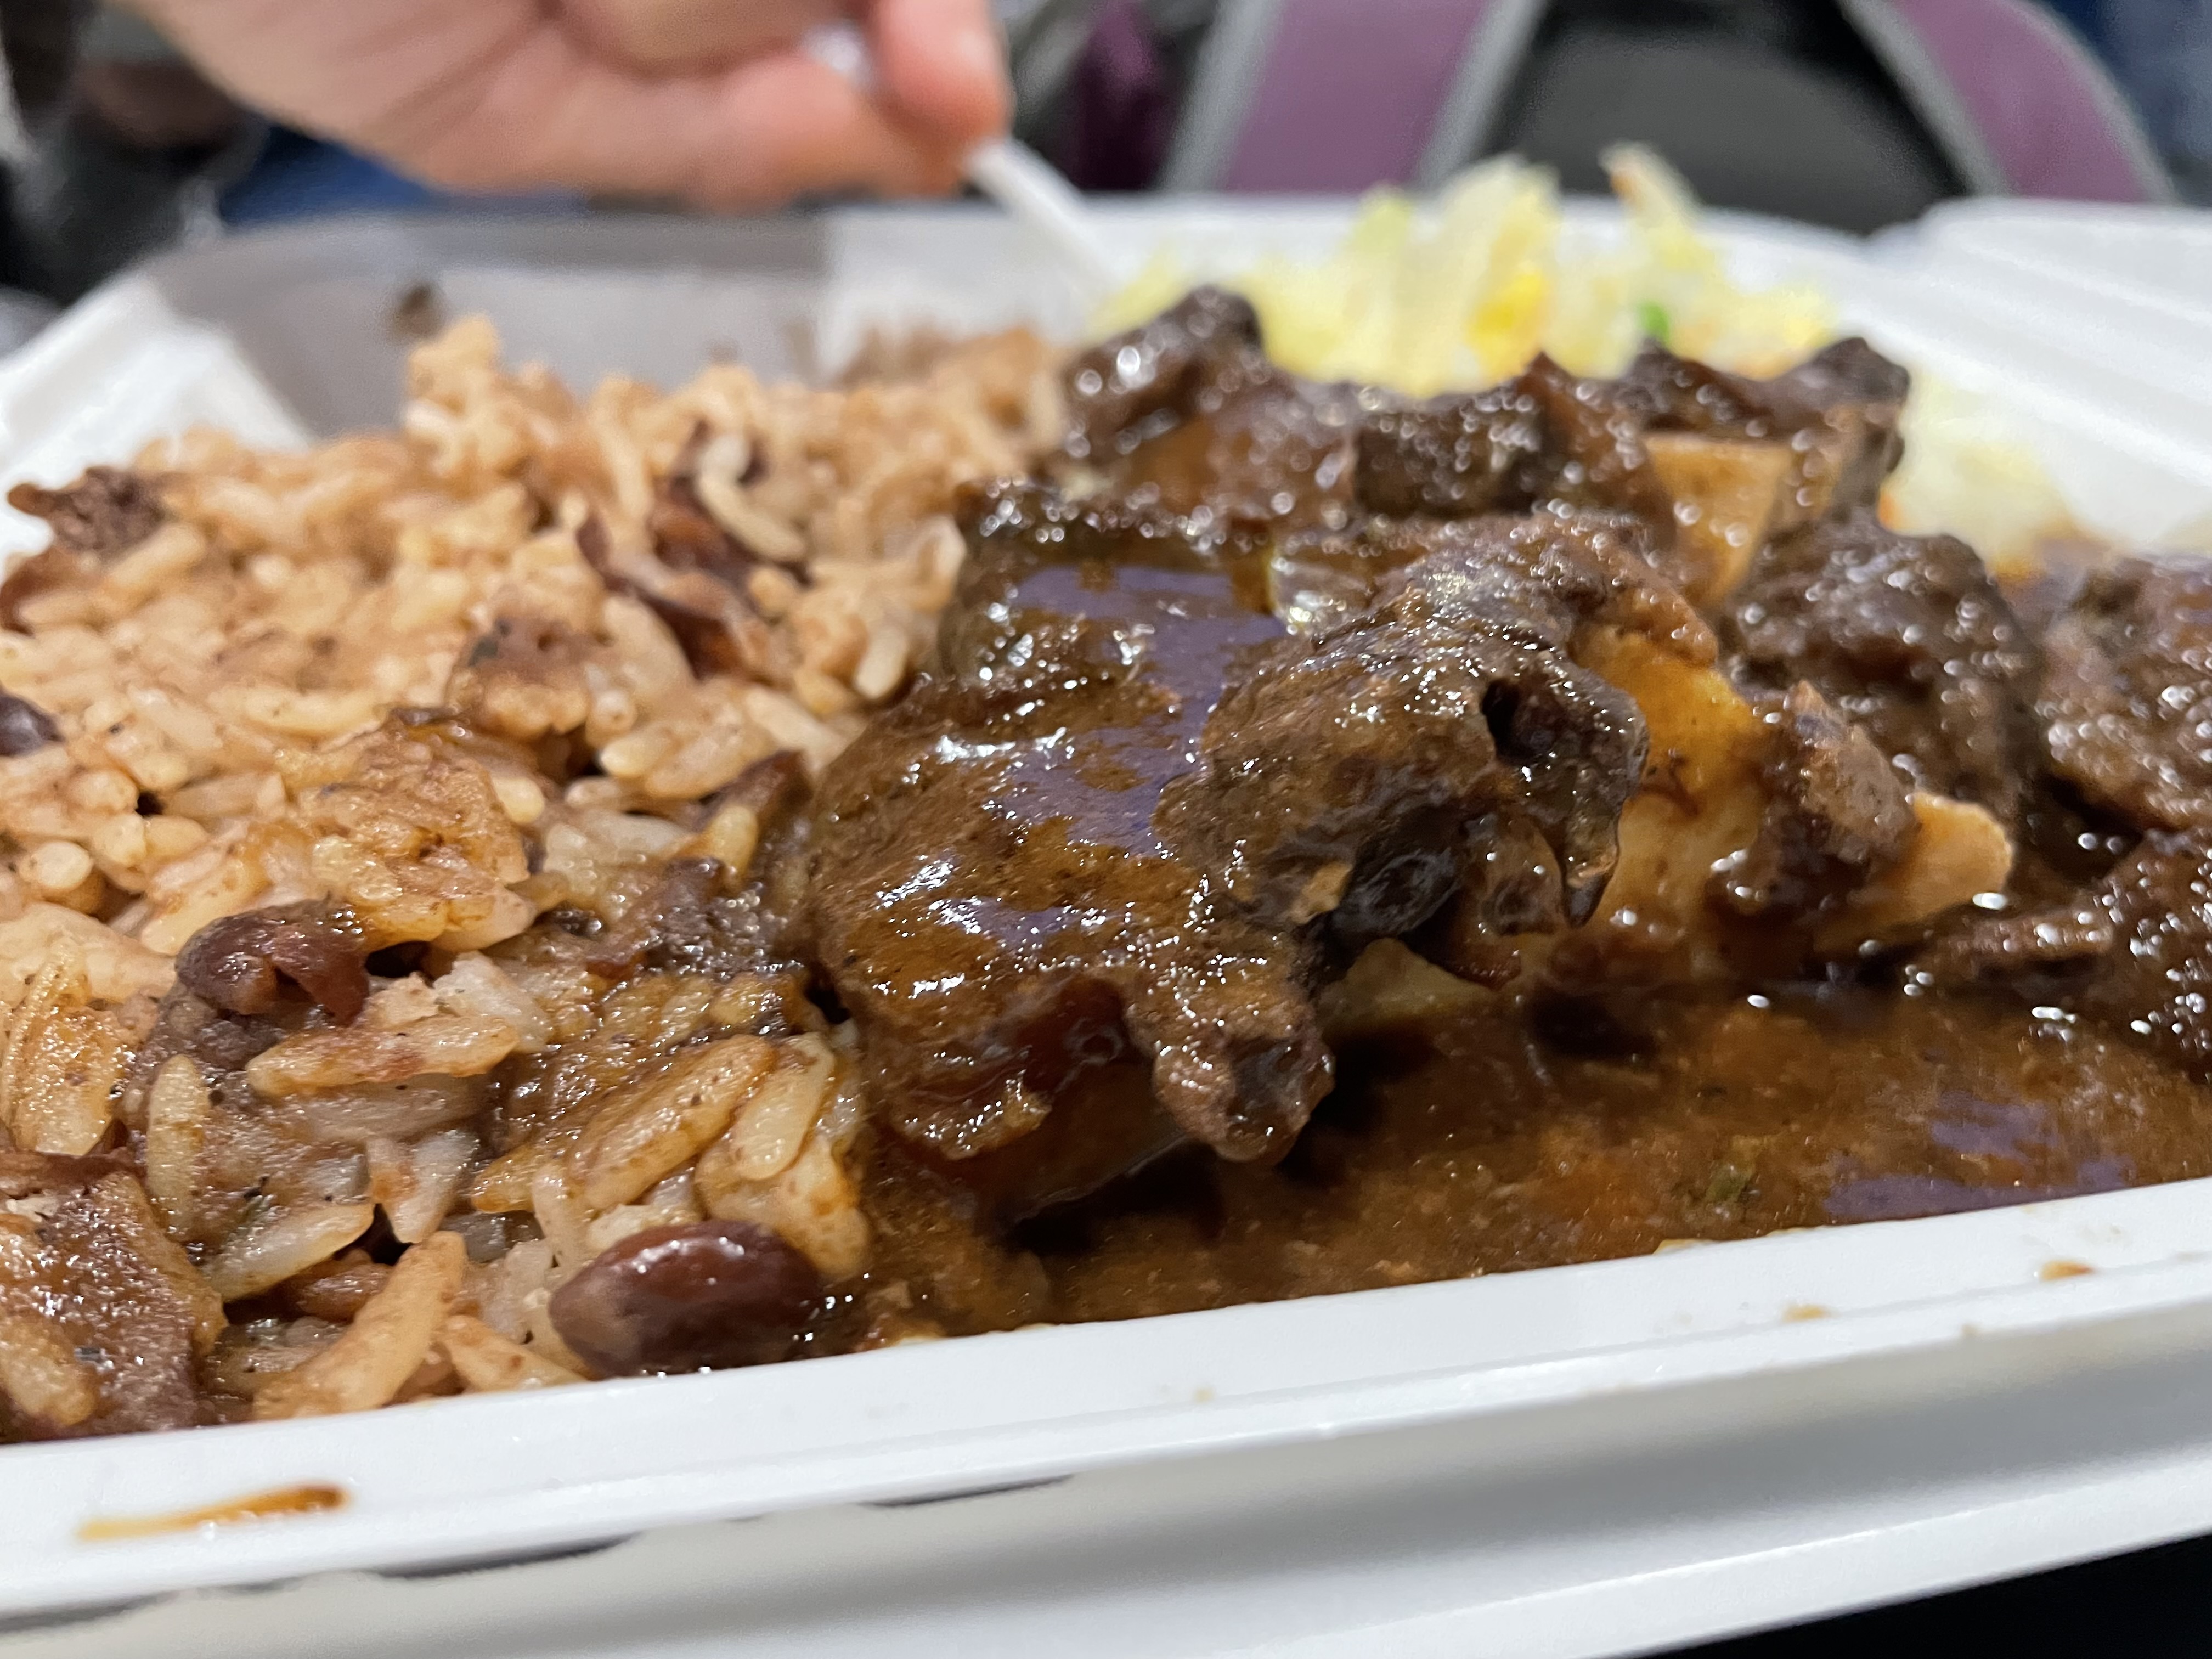 The oxtail comprised of braised beef tails cooked with lima beans seasoned with Fishys' signature spice blend